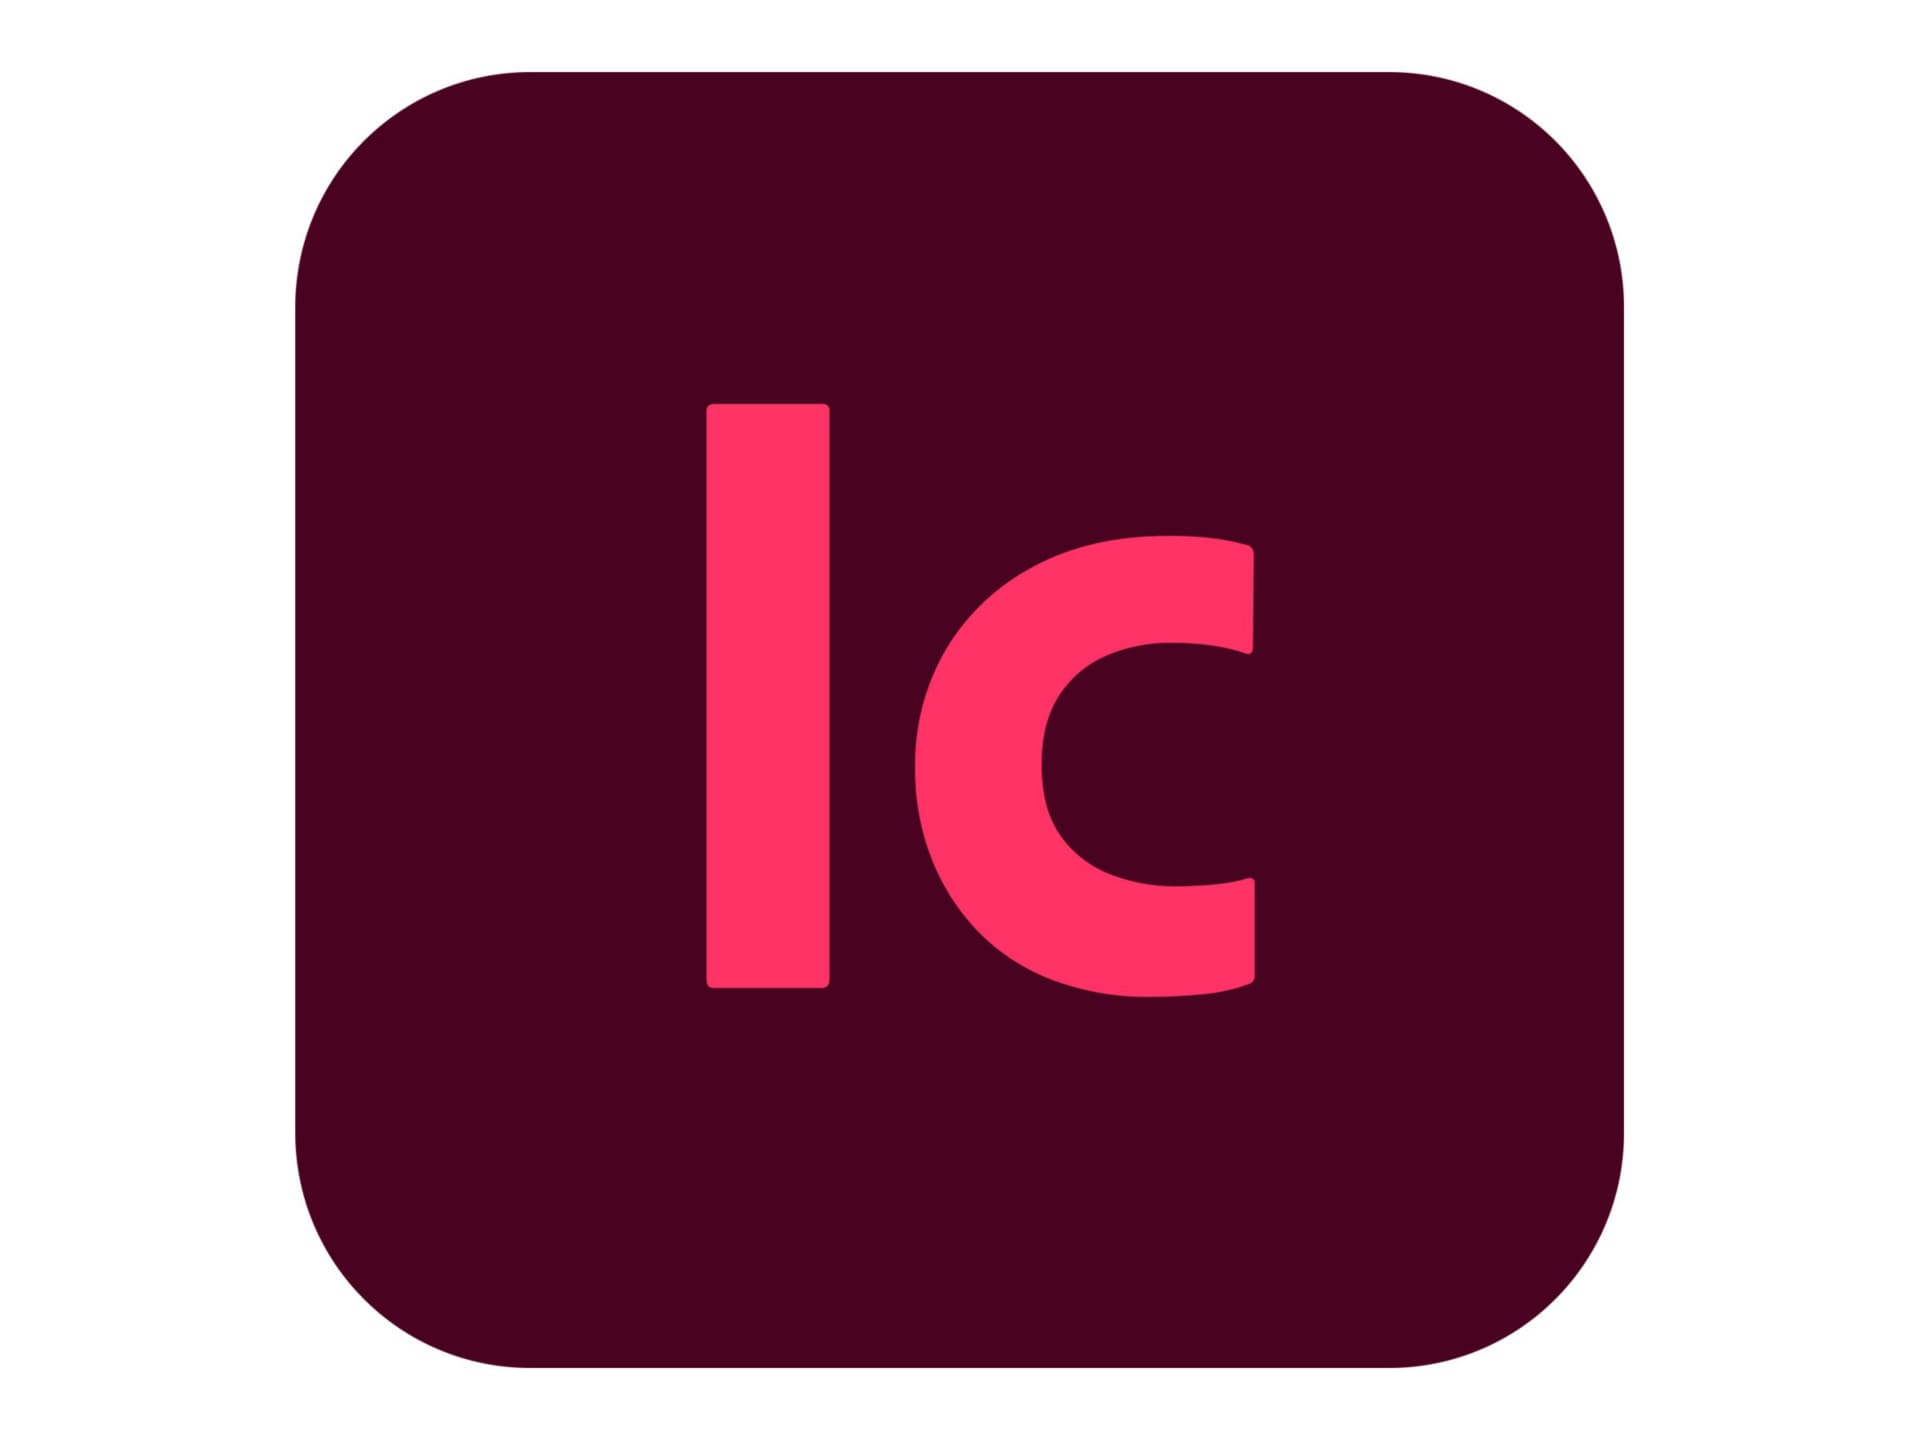 Adobe InCopy CC - Subscription New (14 months) - 1 user